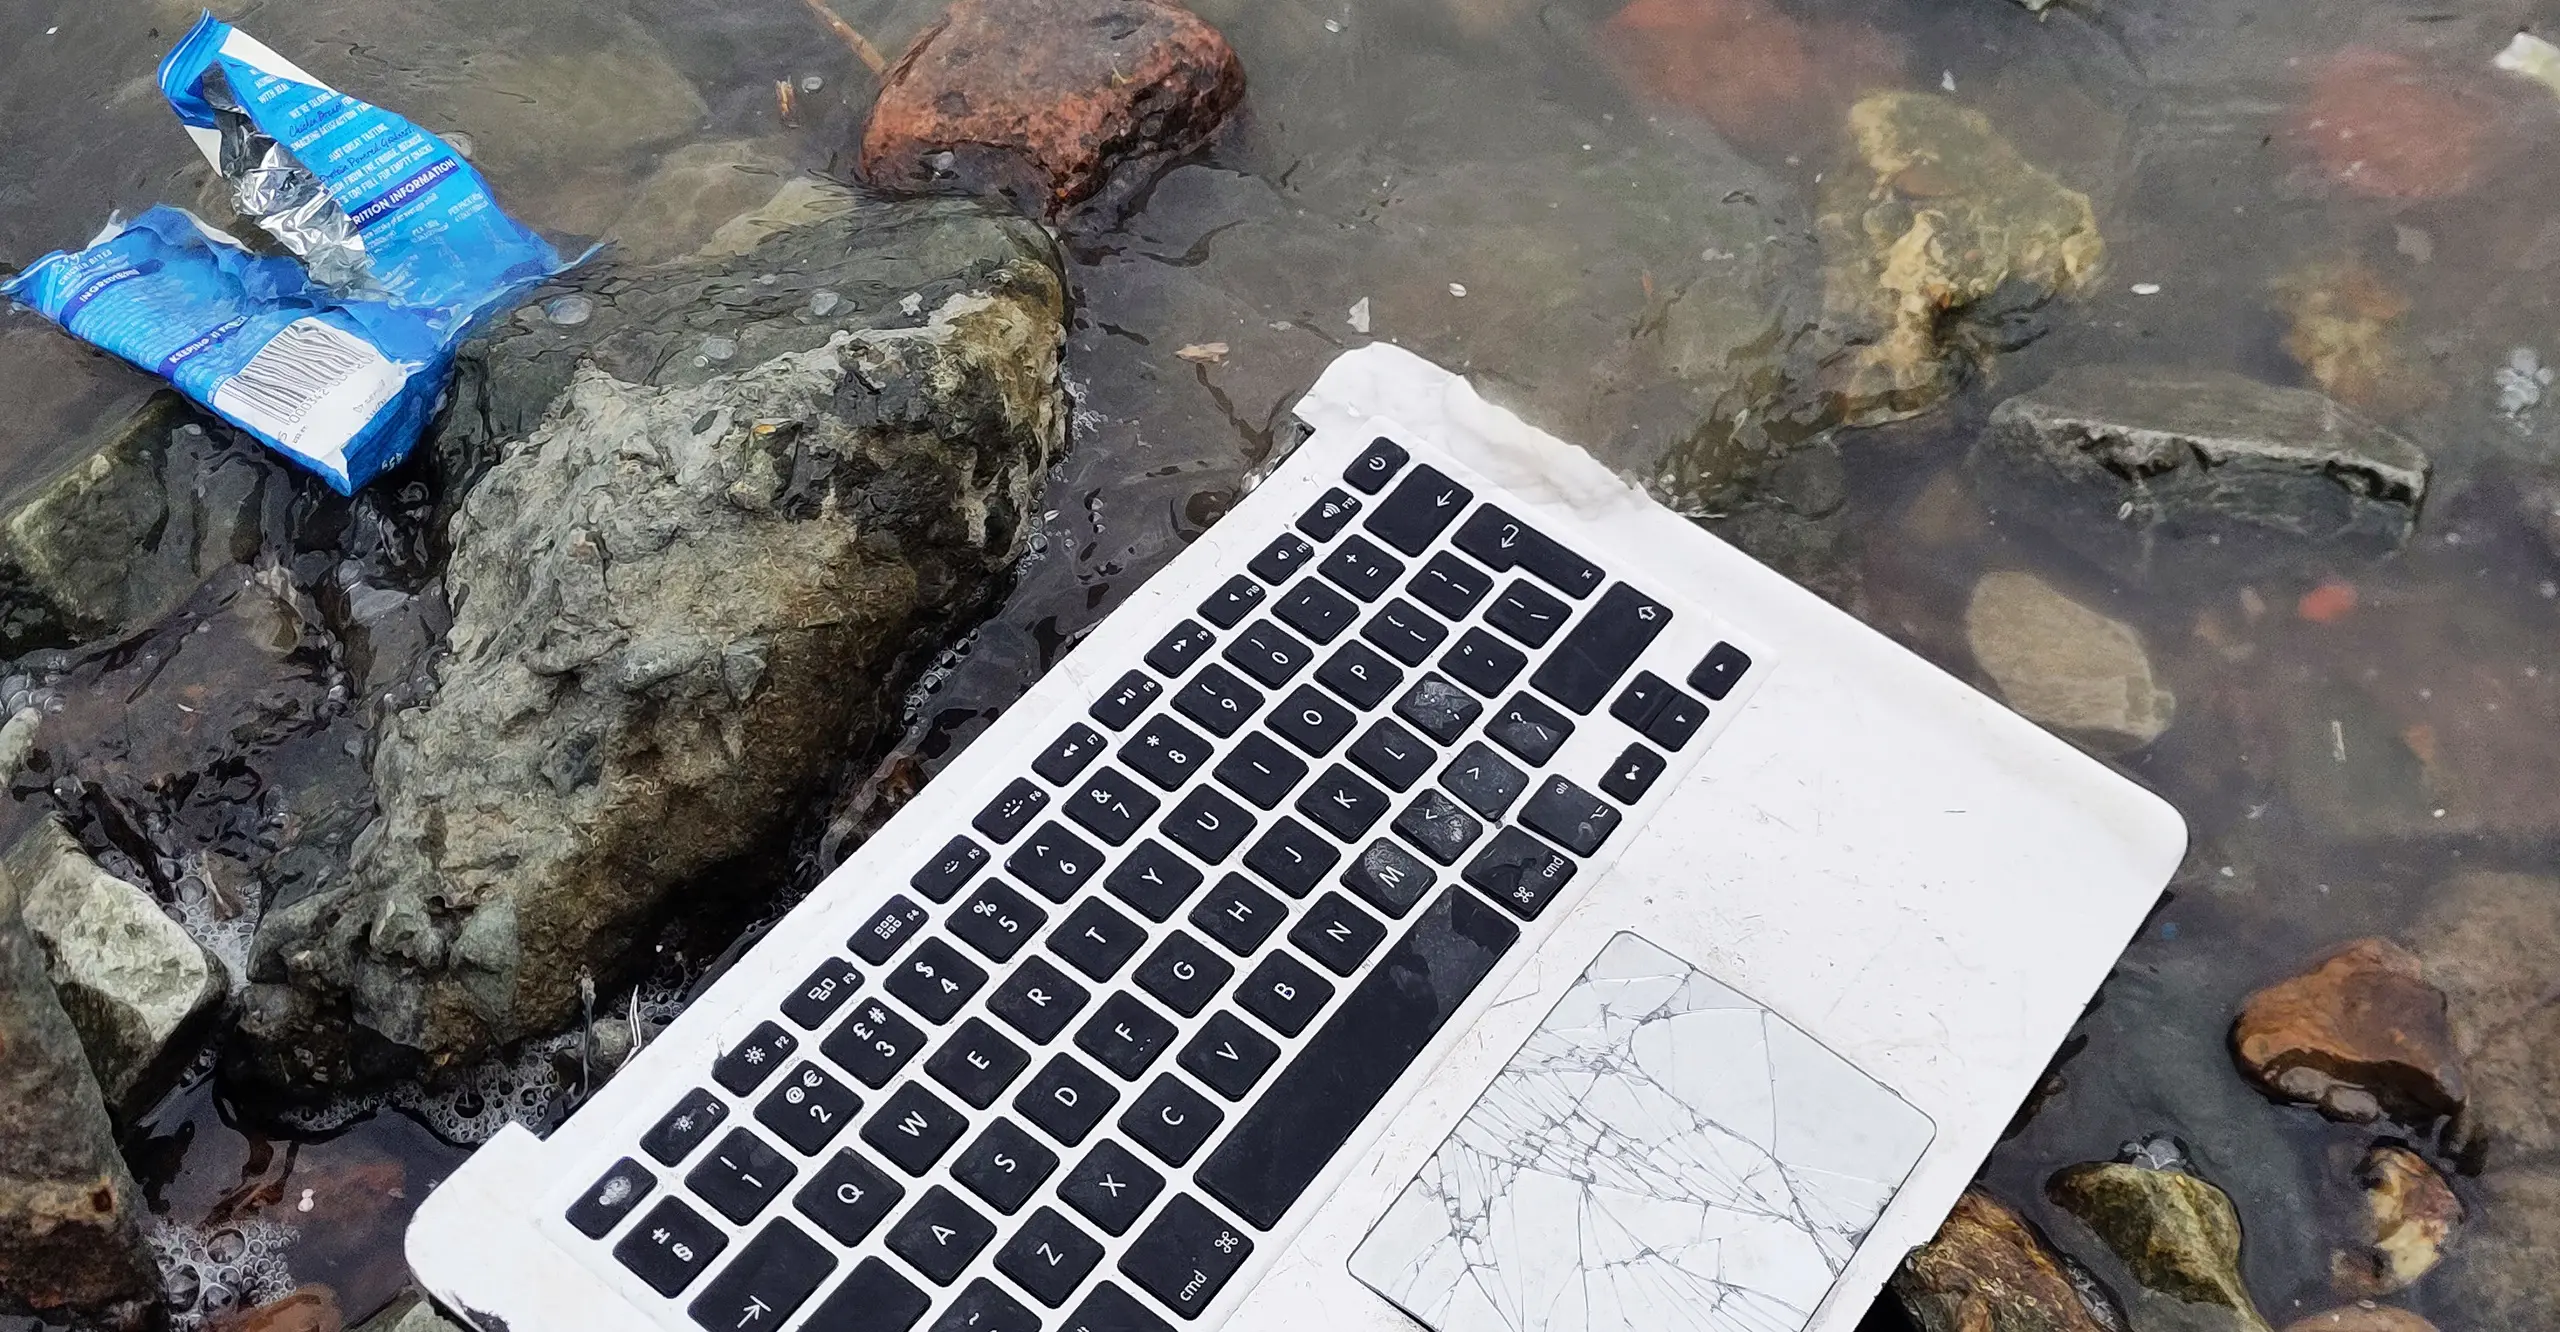 A broken laptop keyboard and an empty bag of crisps sitting ontop of a rocky foreshore.